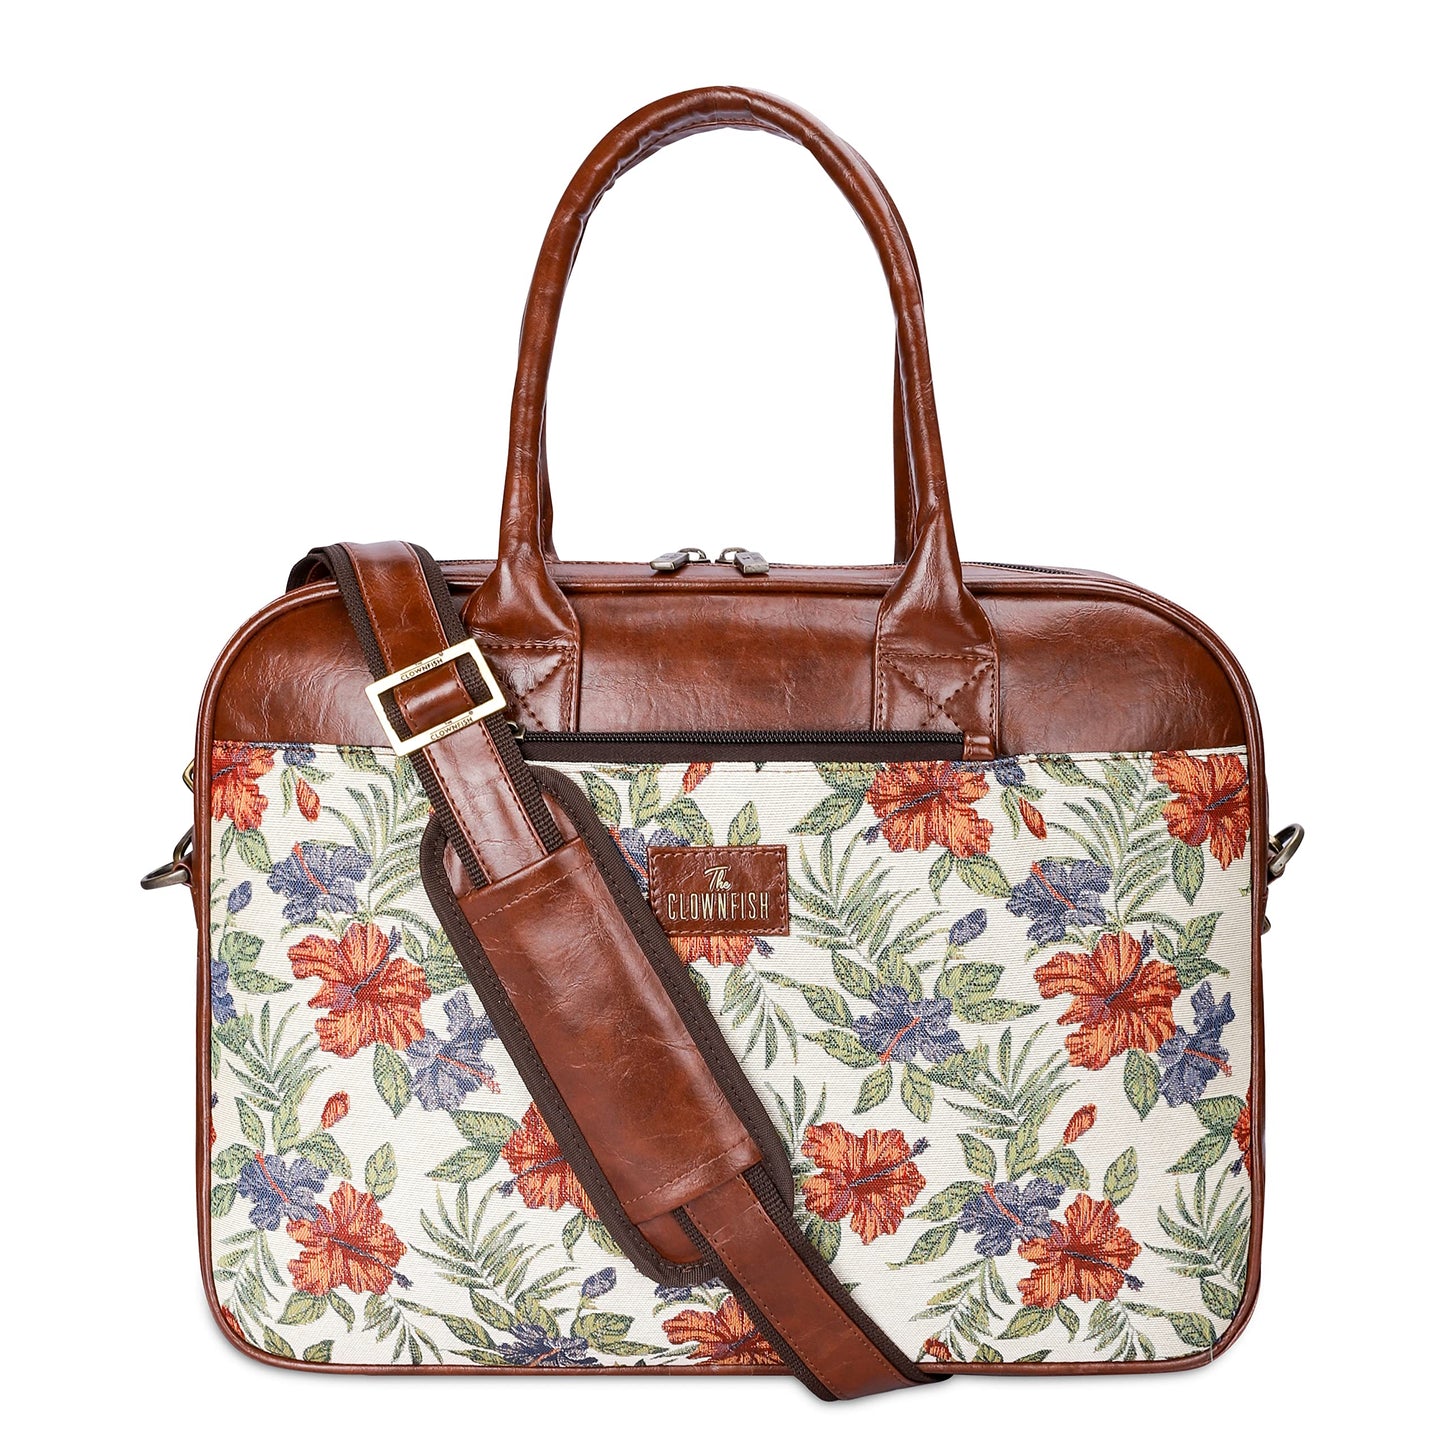 THE CLOWNFISH Deborah series 15.6 inch Laptop Bag For Women Tapestry Fabric & Faux Leather Office Bag Briefcase Messenger Sling Handbag Business Bag (Maroon-Floral)